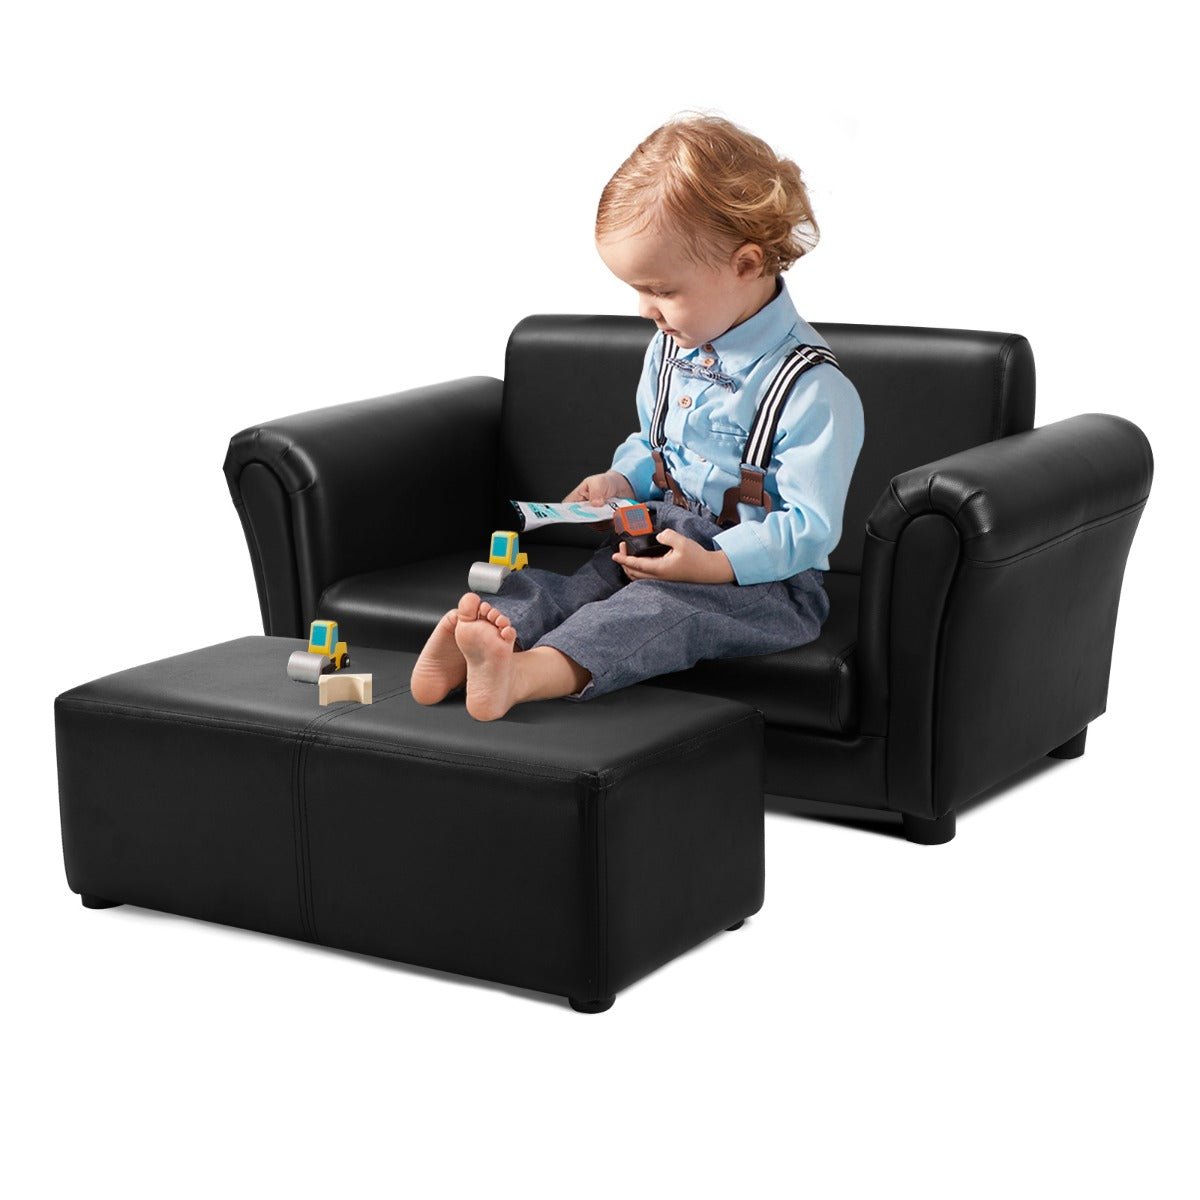 Boys' and Girls' Sofa Set: 2-Seat with Footstool and Solid Wood Frame